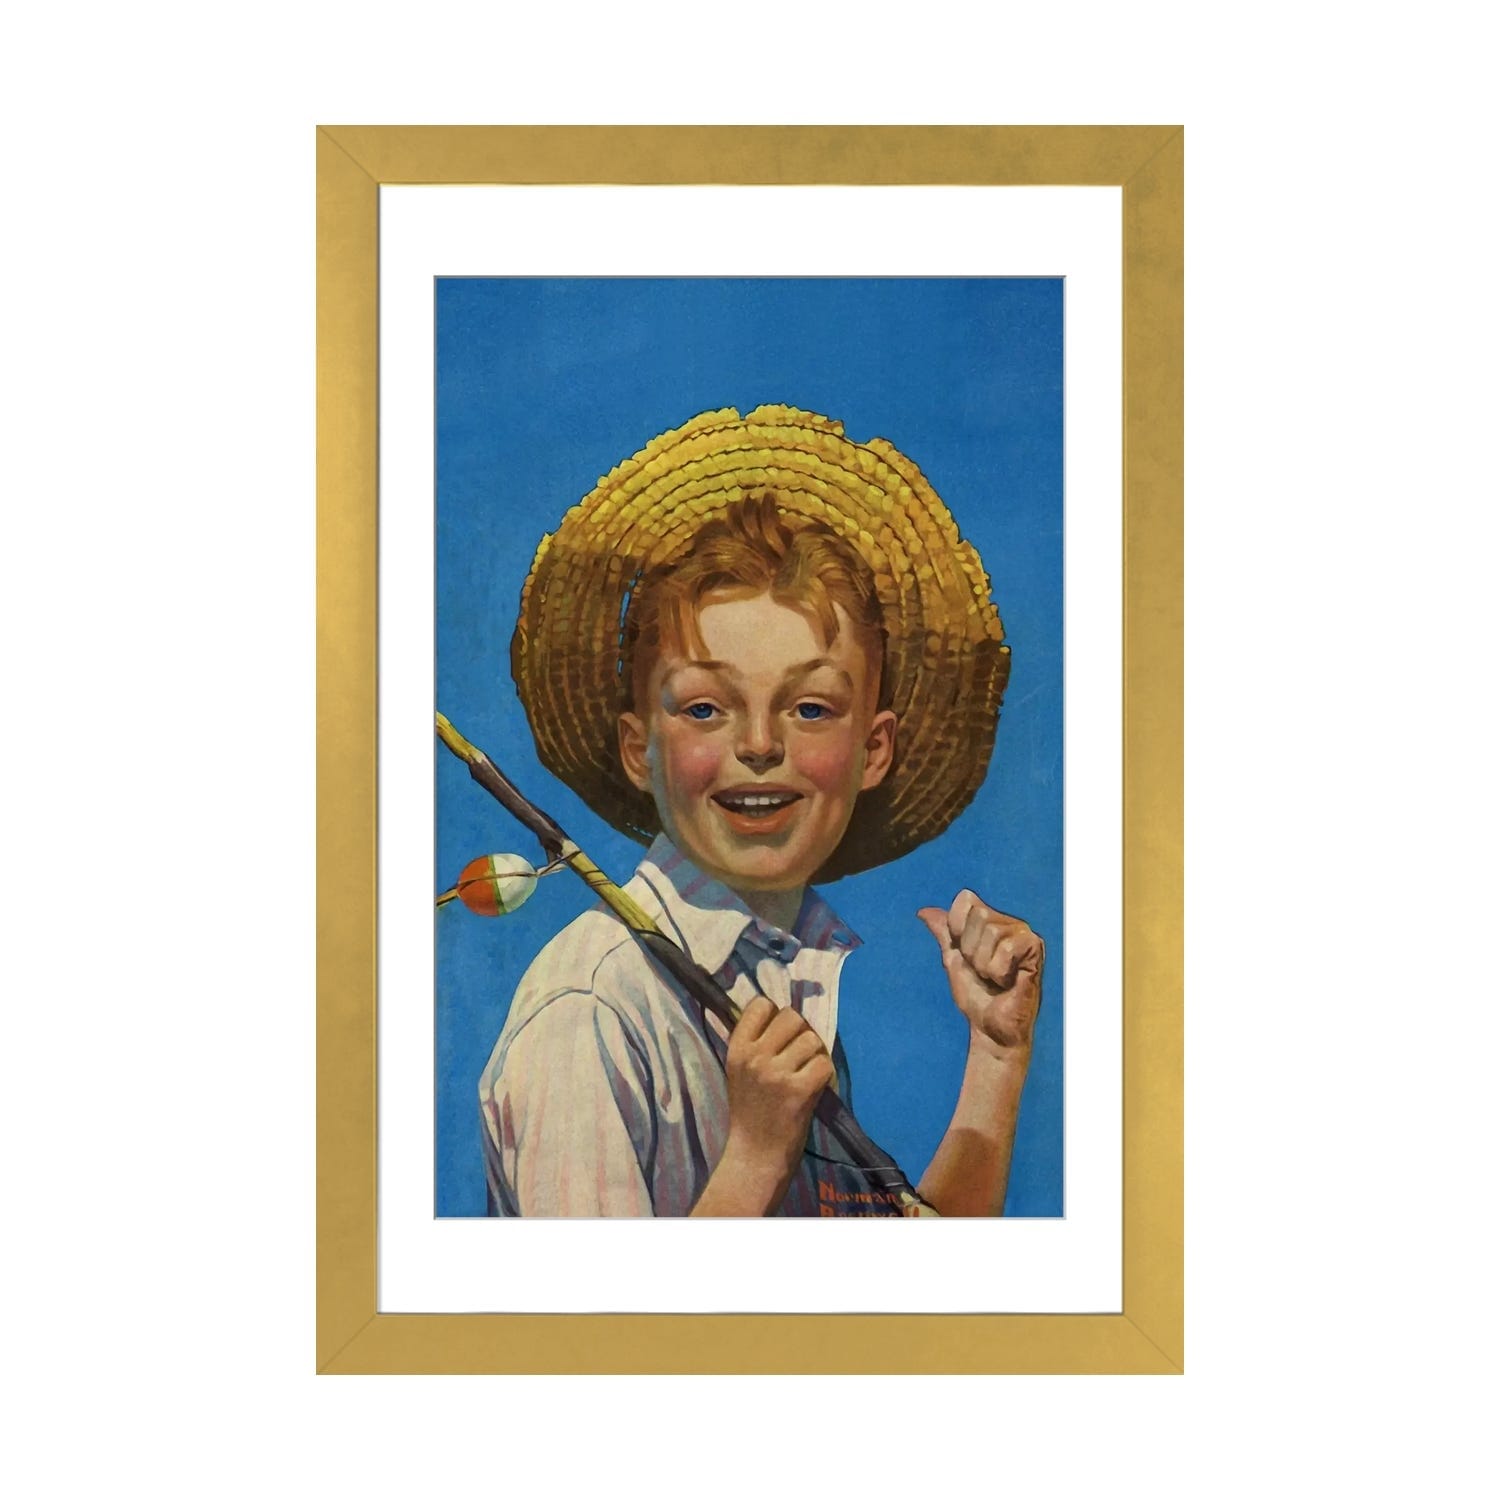 iCanvas Boy with Fishing Pole by Norman Rockwell - Bed Bath